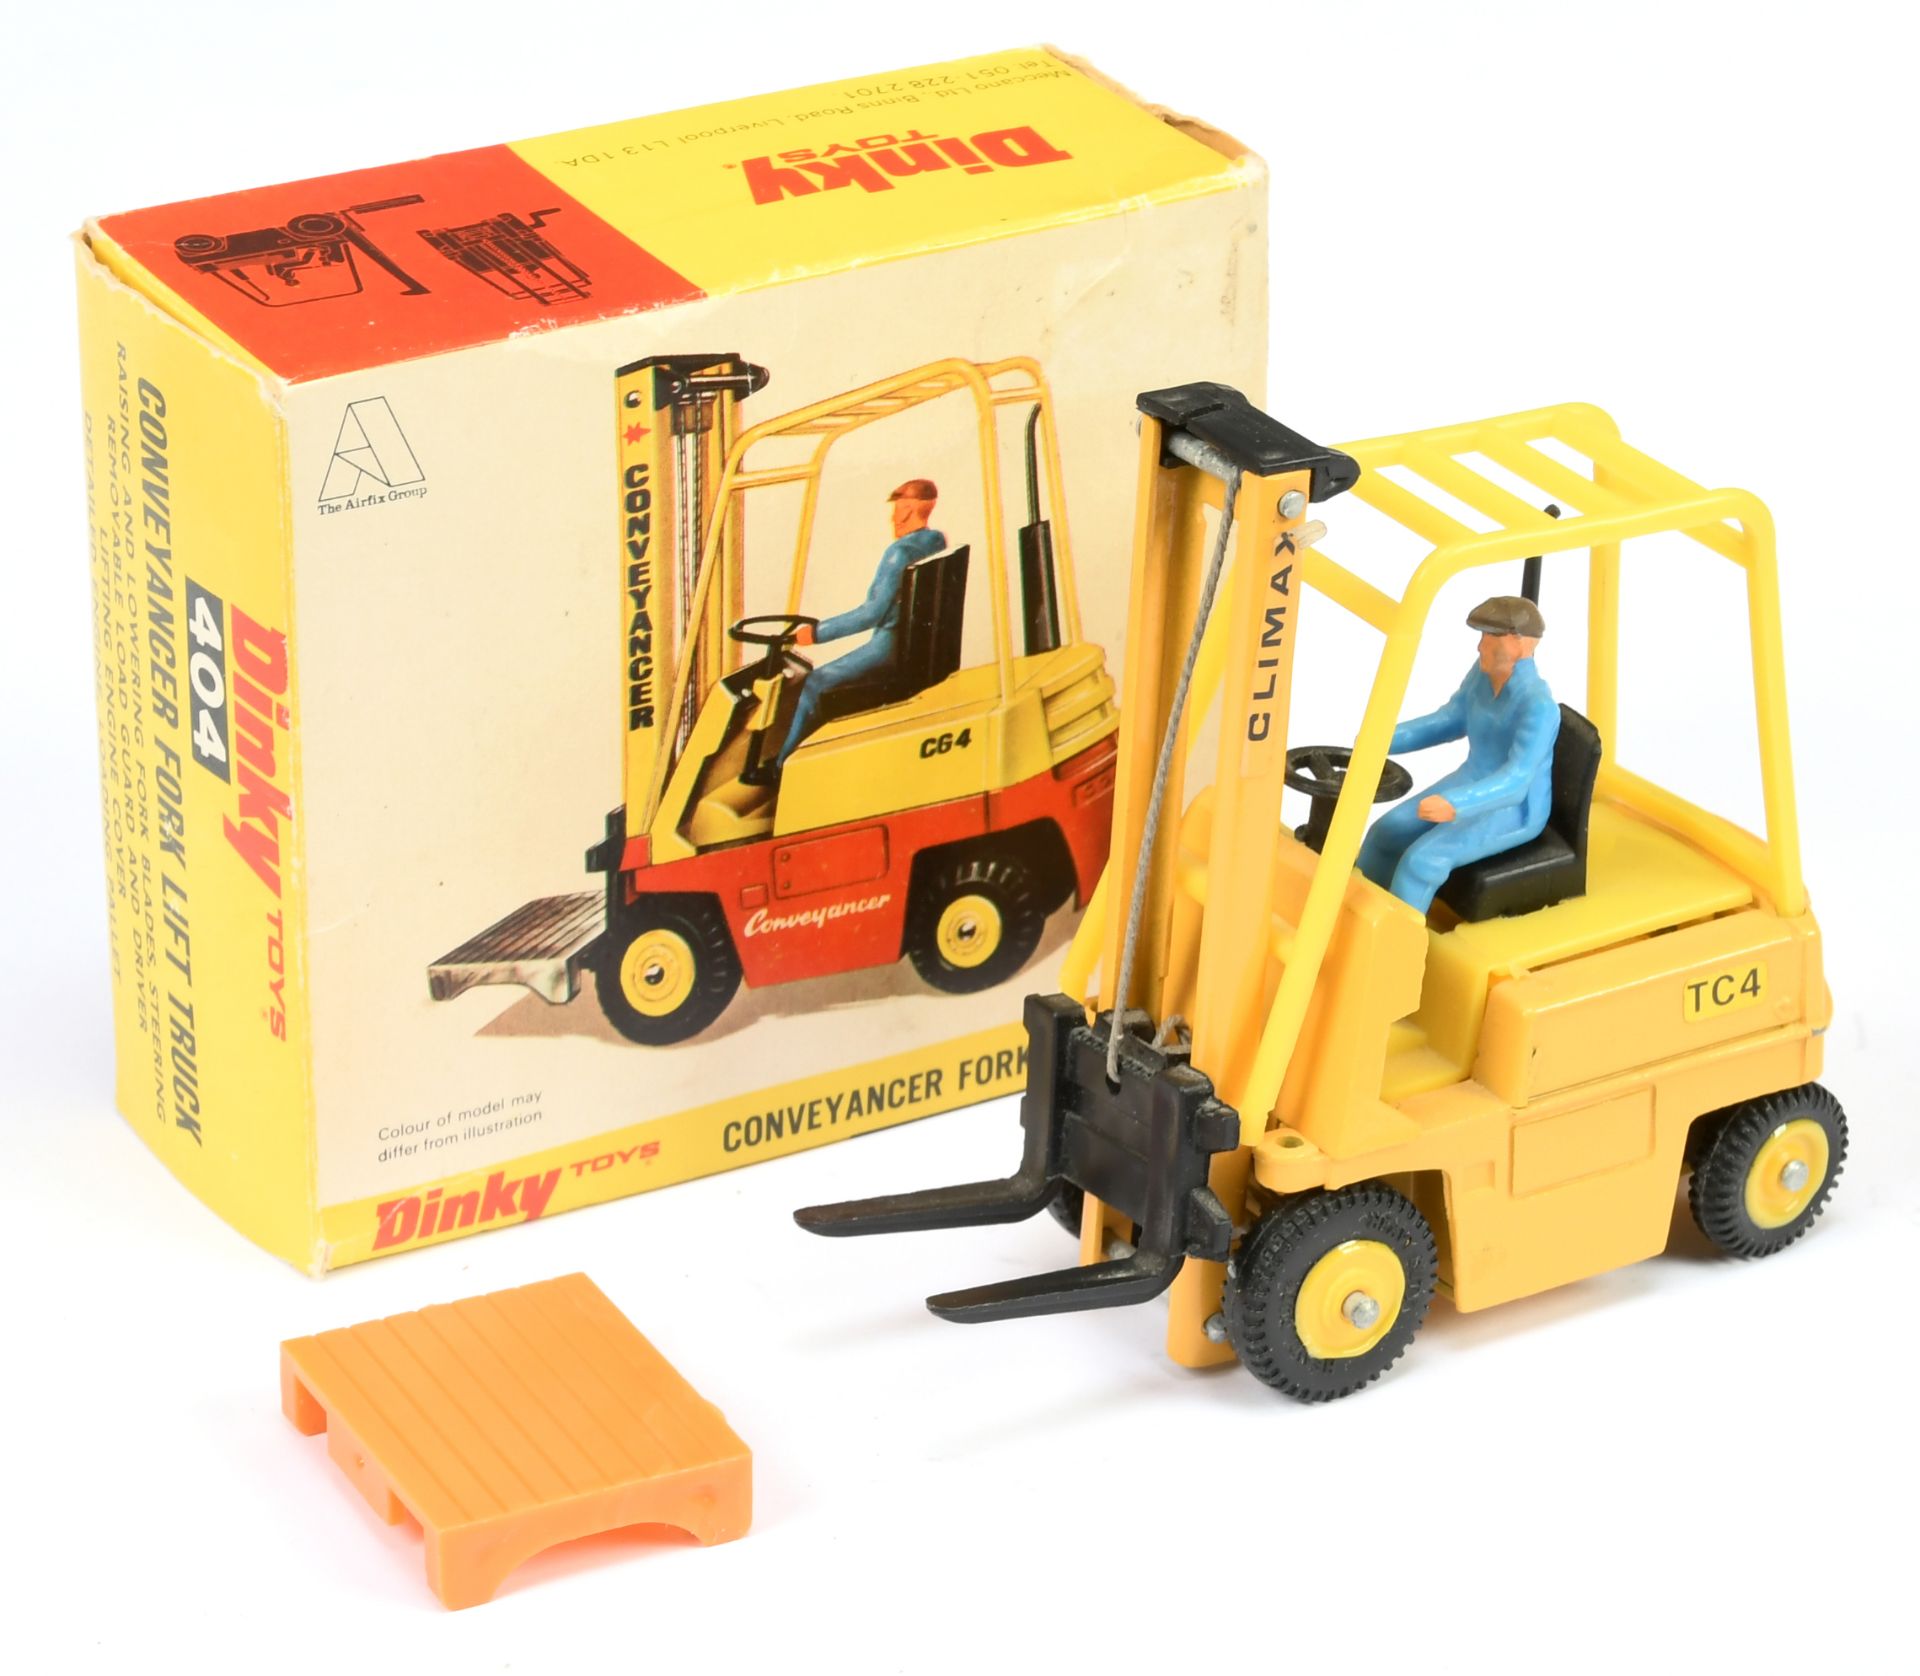 Dinky Toys 404 Conneyancer Fork Lift Truck - Deep yellow body, yellow plastic inner and cage, bla...